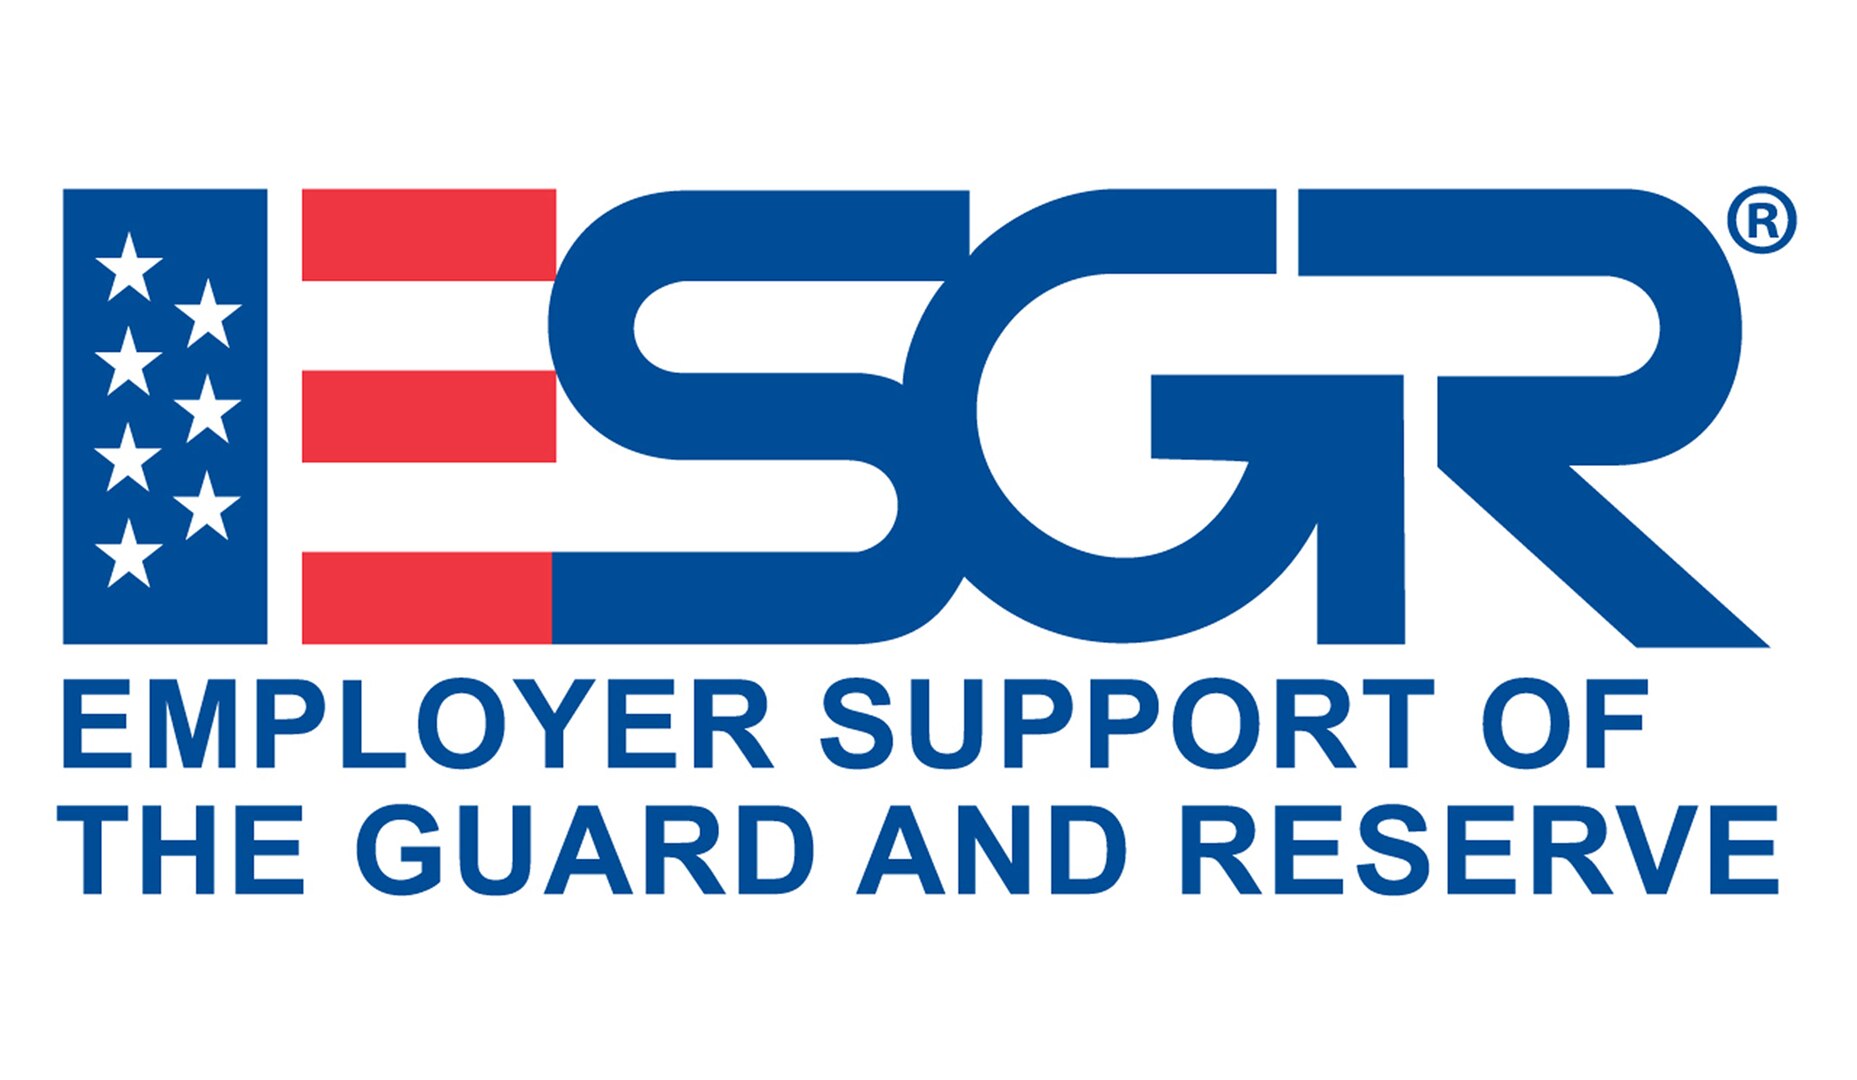 Logo of the Employer Support of the Guard and Reserve, which is being honored this week by presidential proclamation.